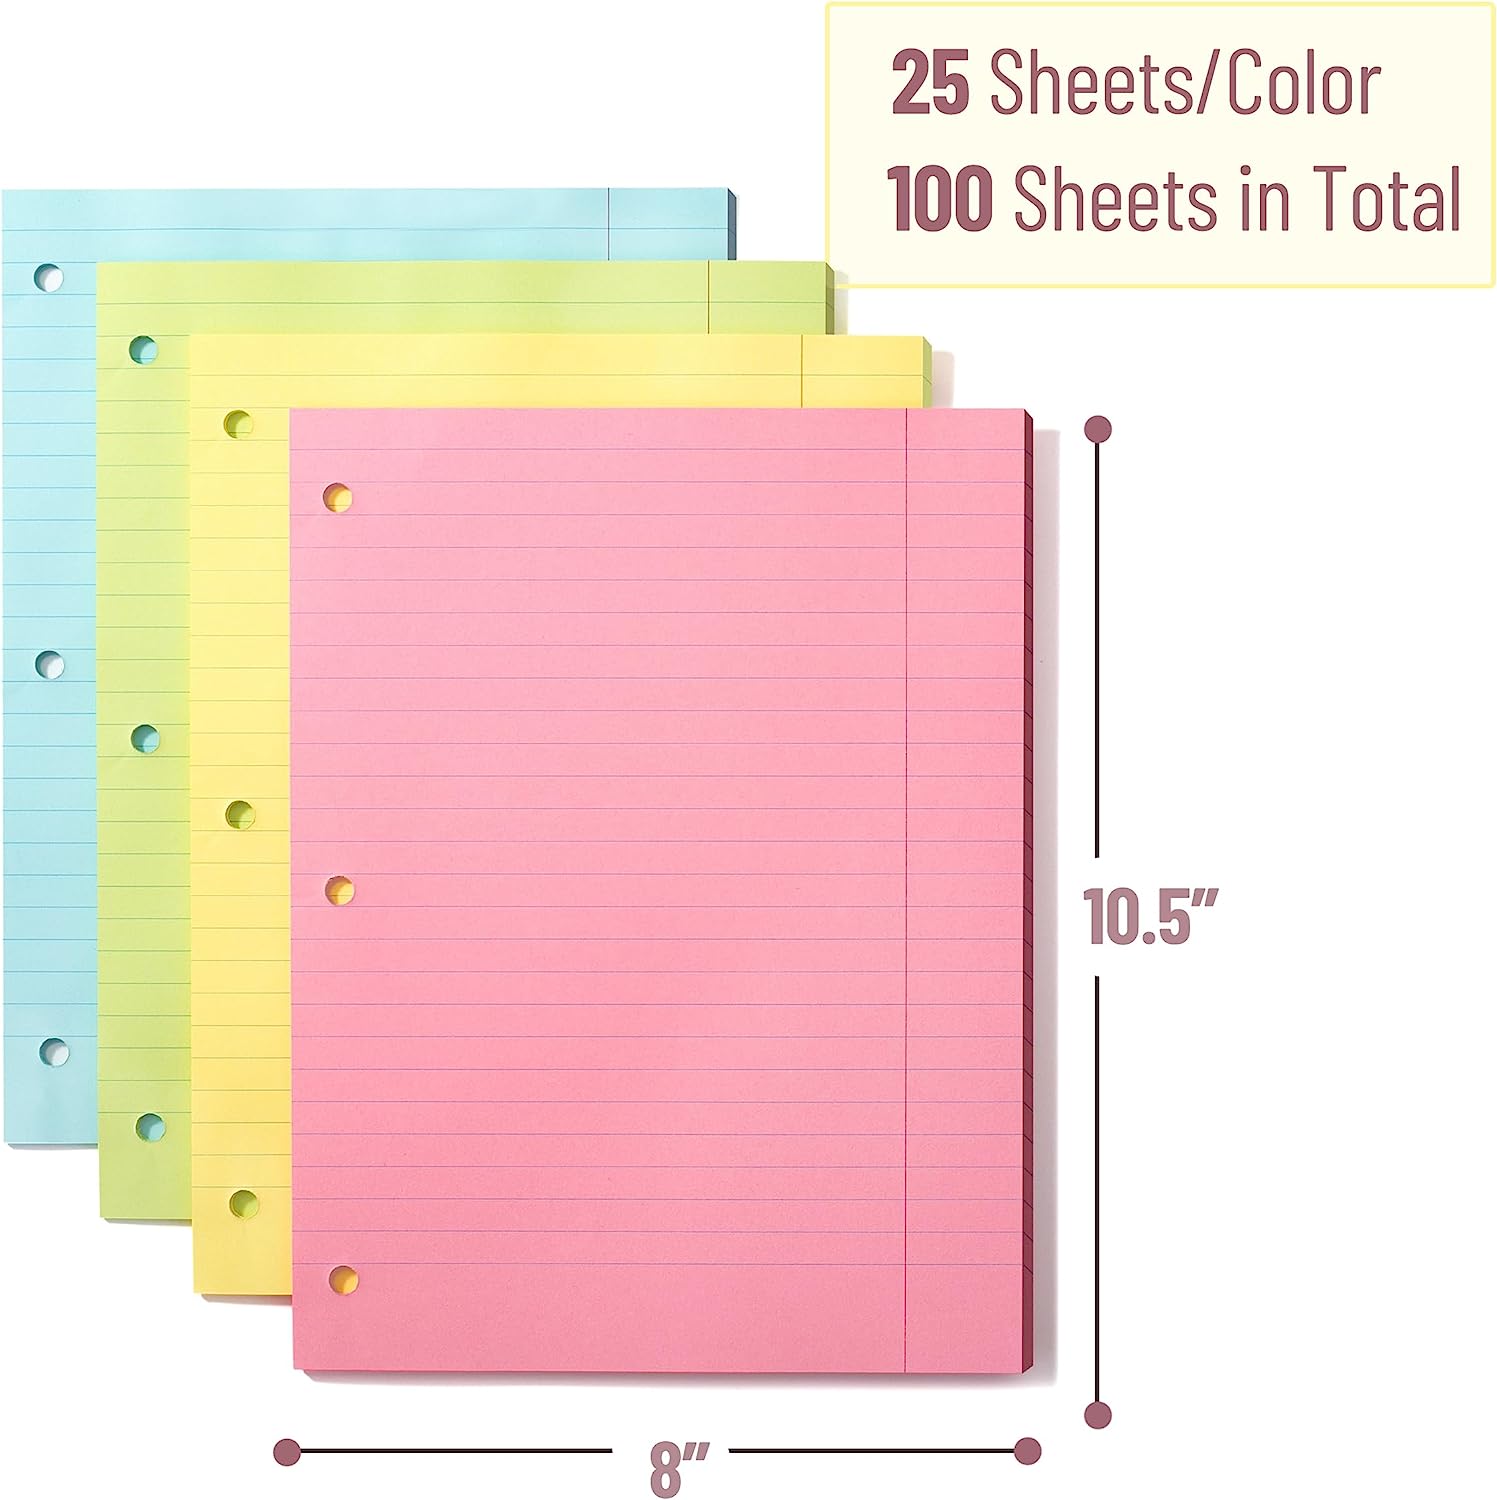 Colored Loose Leaf Paper Wide Ruled, 100 Sheets, 8” x 10.5”, 3- Hole Punched, Notebook Paper, Lined Paper, Binder Paper, Writing Paper, Filler Paper, Wide Ruled Notebook Paper